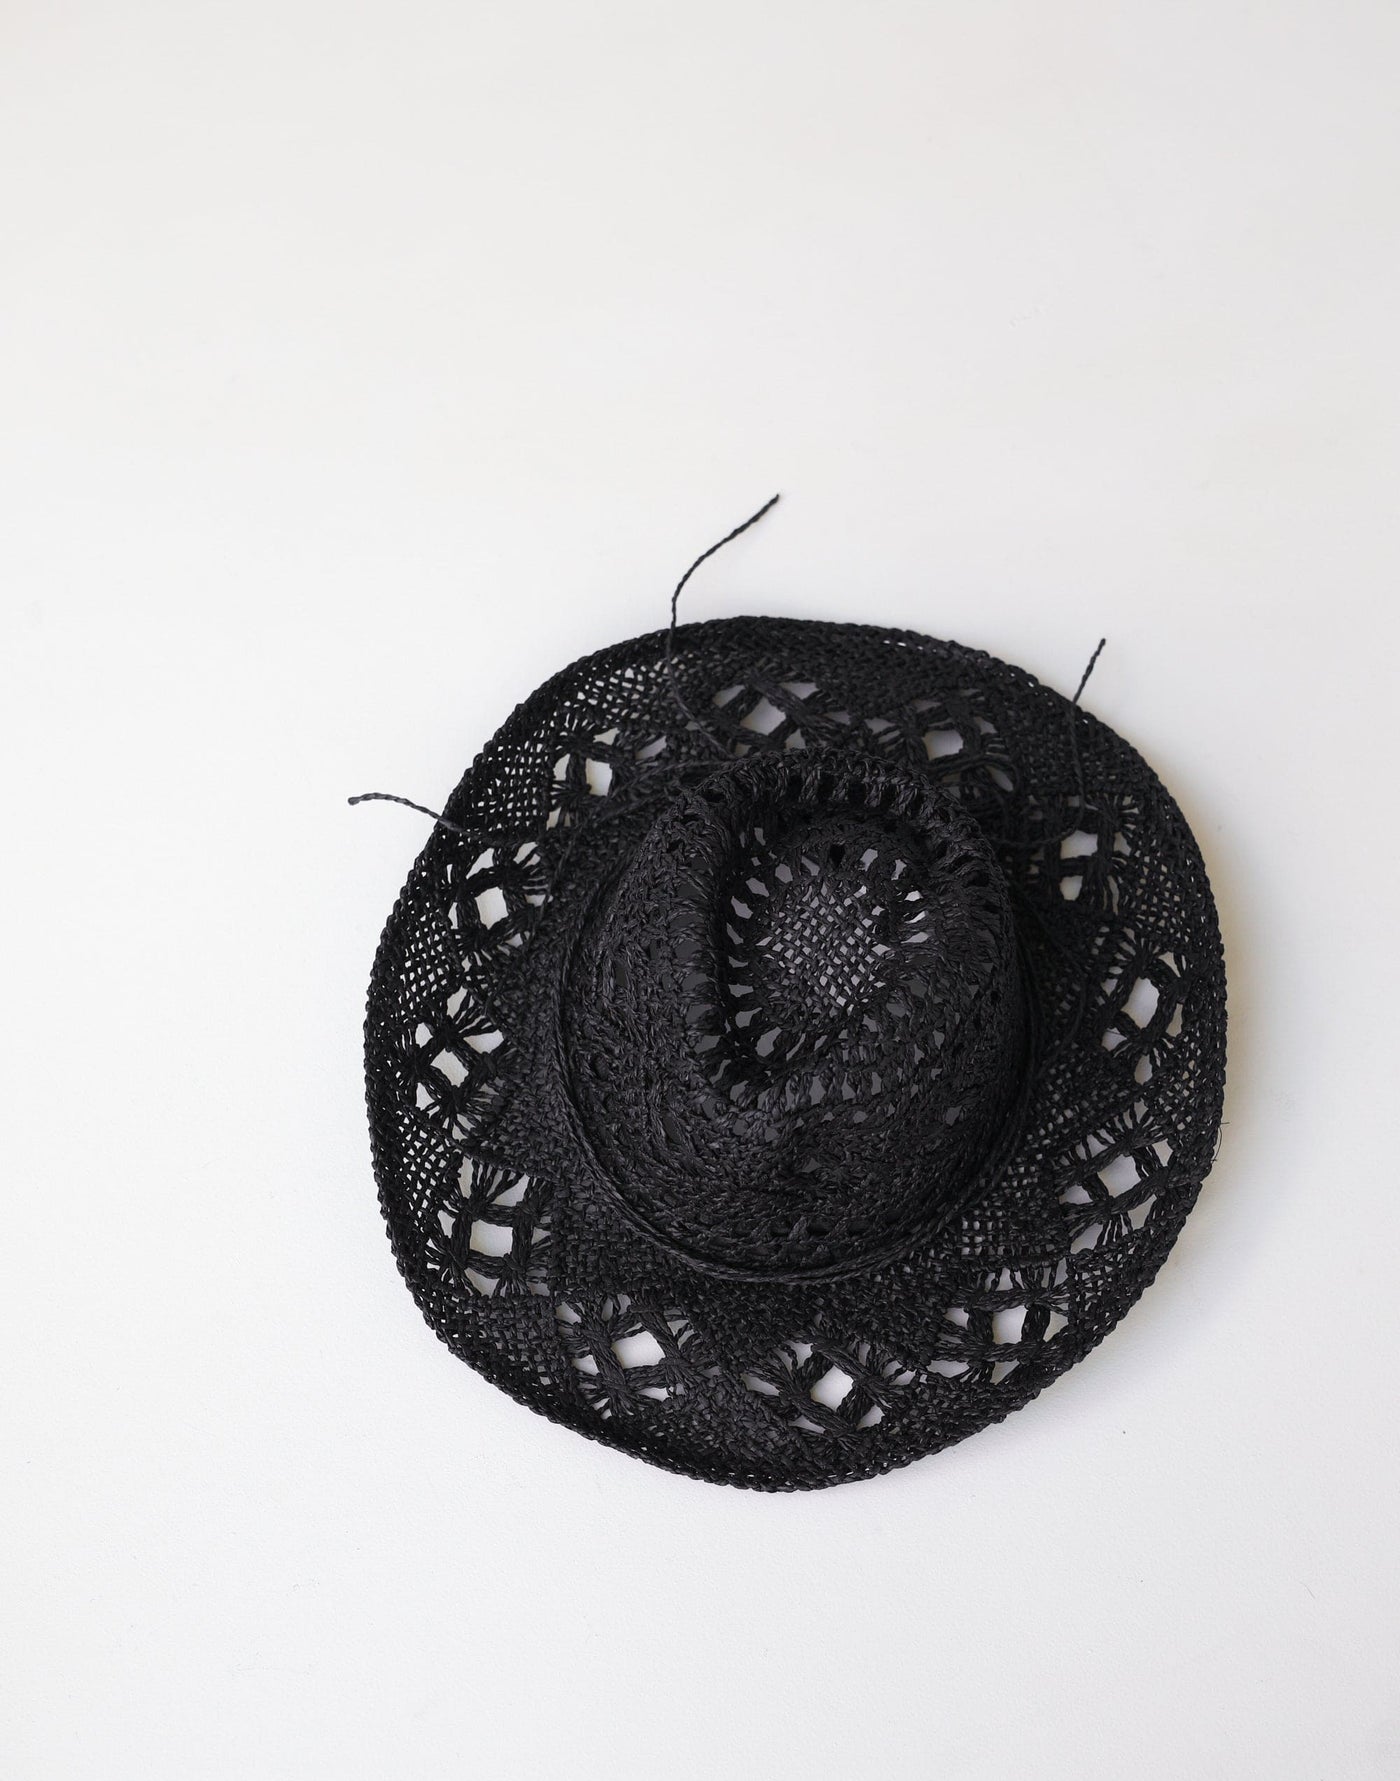 Mia Cowboy Hat (Black) - Woven Western Straw Hat With Bow - Women's Accessories - Charcoal Clothing